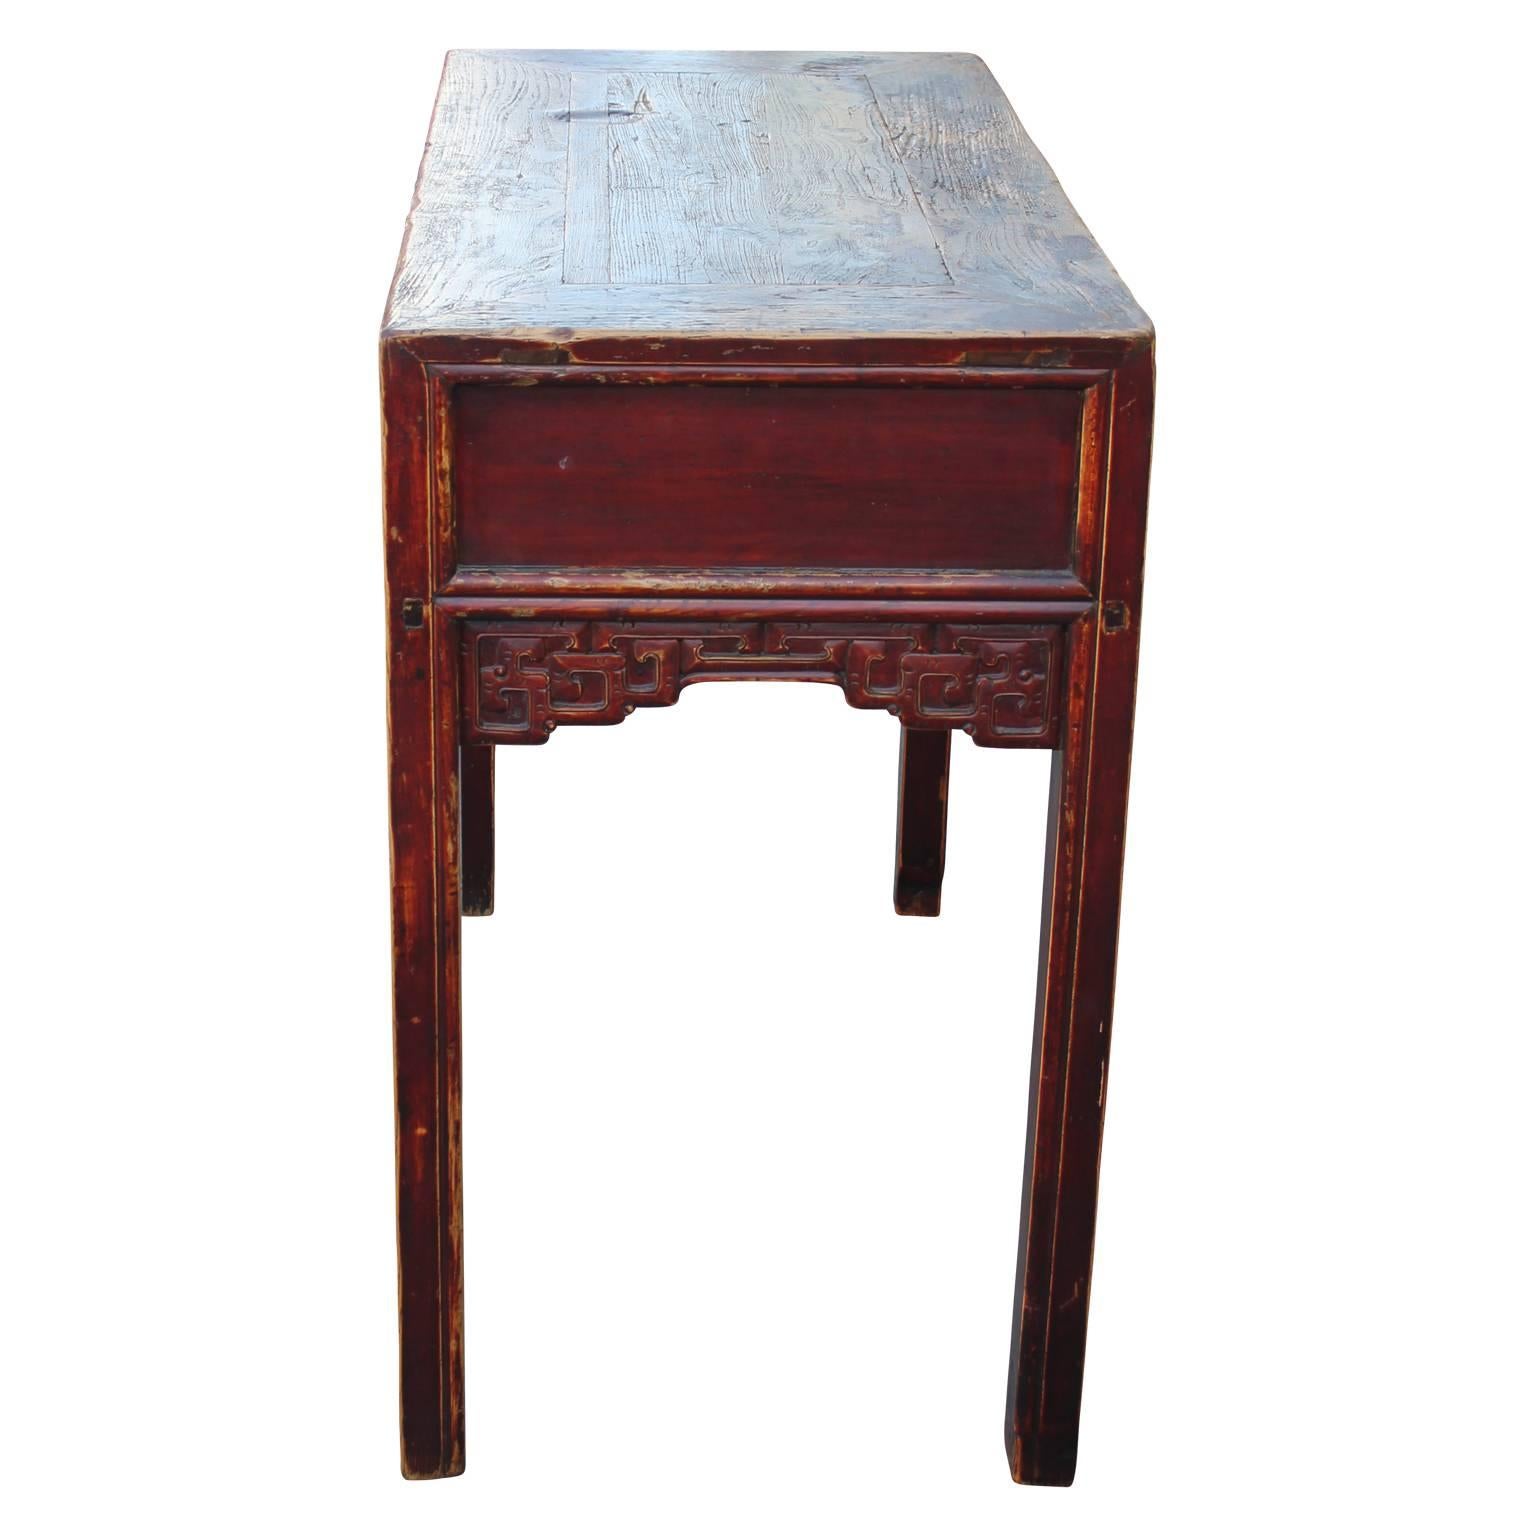 Chinoiserie 19th Century Red Lacquered Chinese Desk Altar Table with Carved Detailing